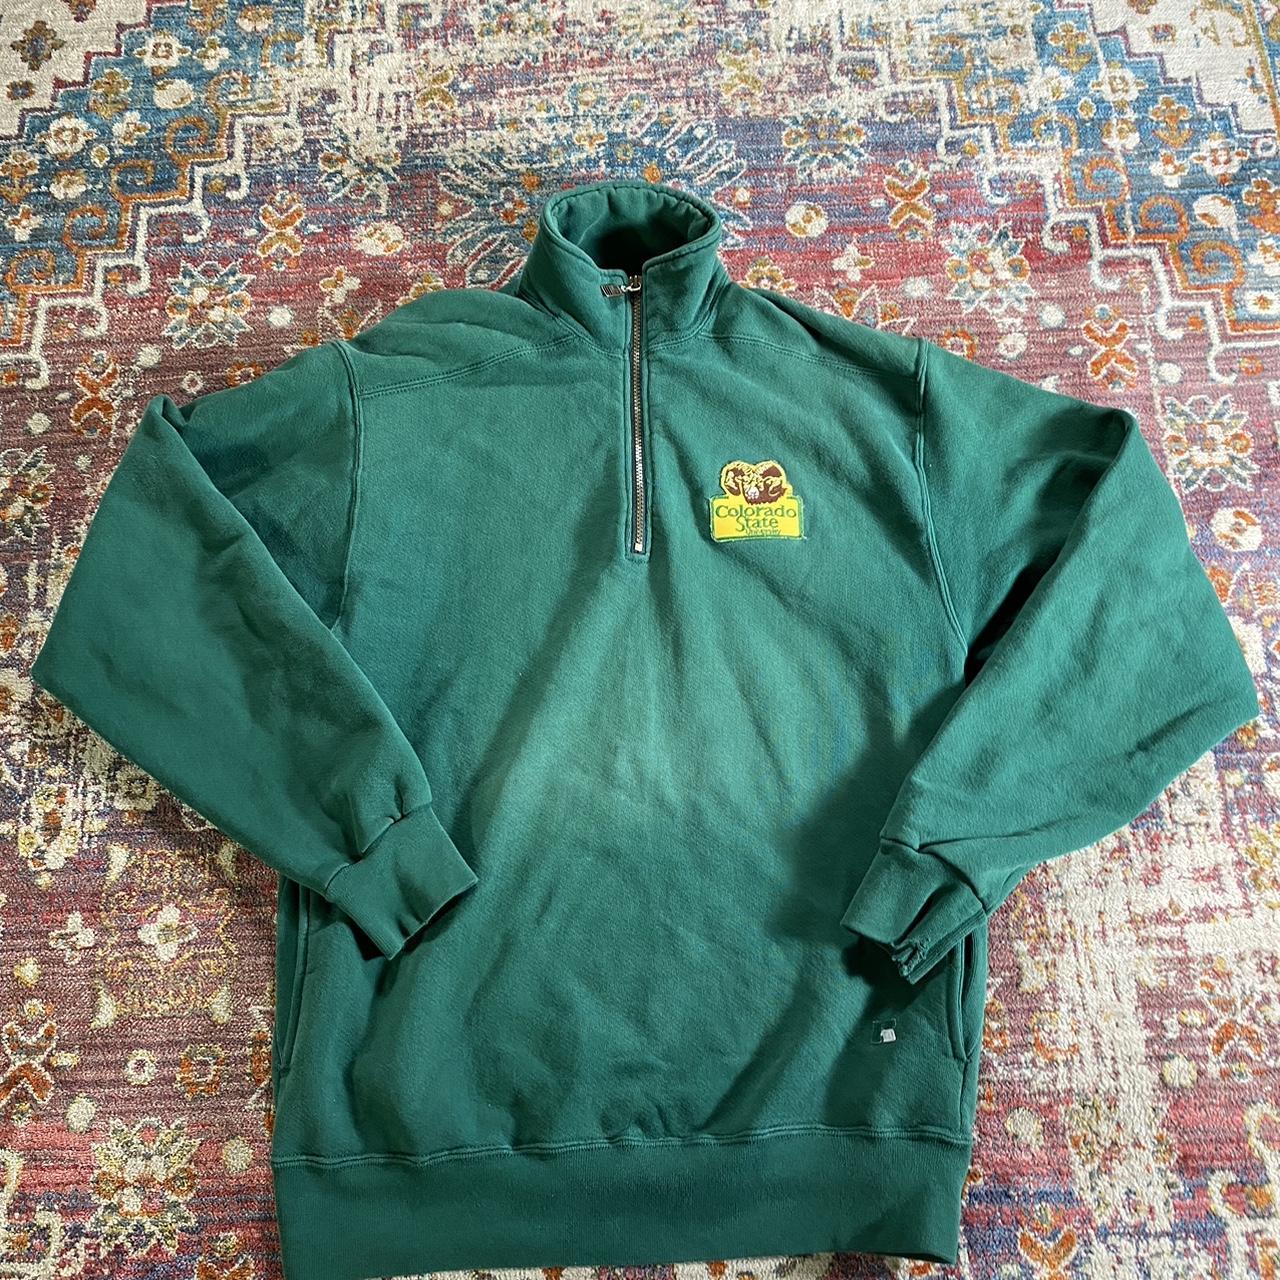 Russell Athletic Men's Green and Yellow Hoodie | Depop